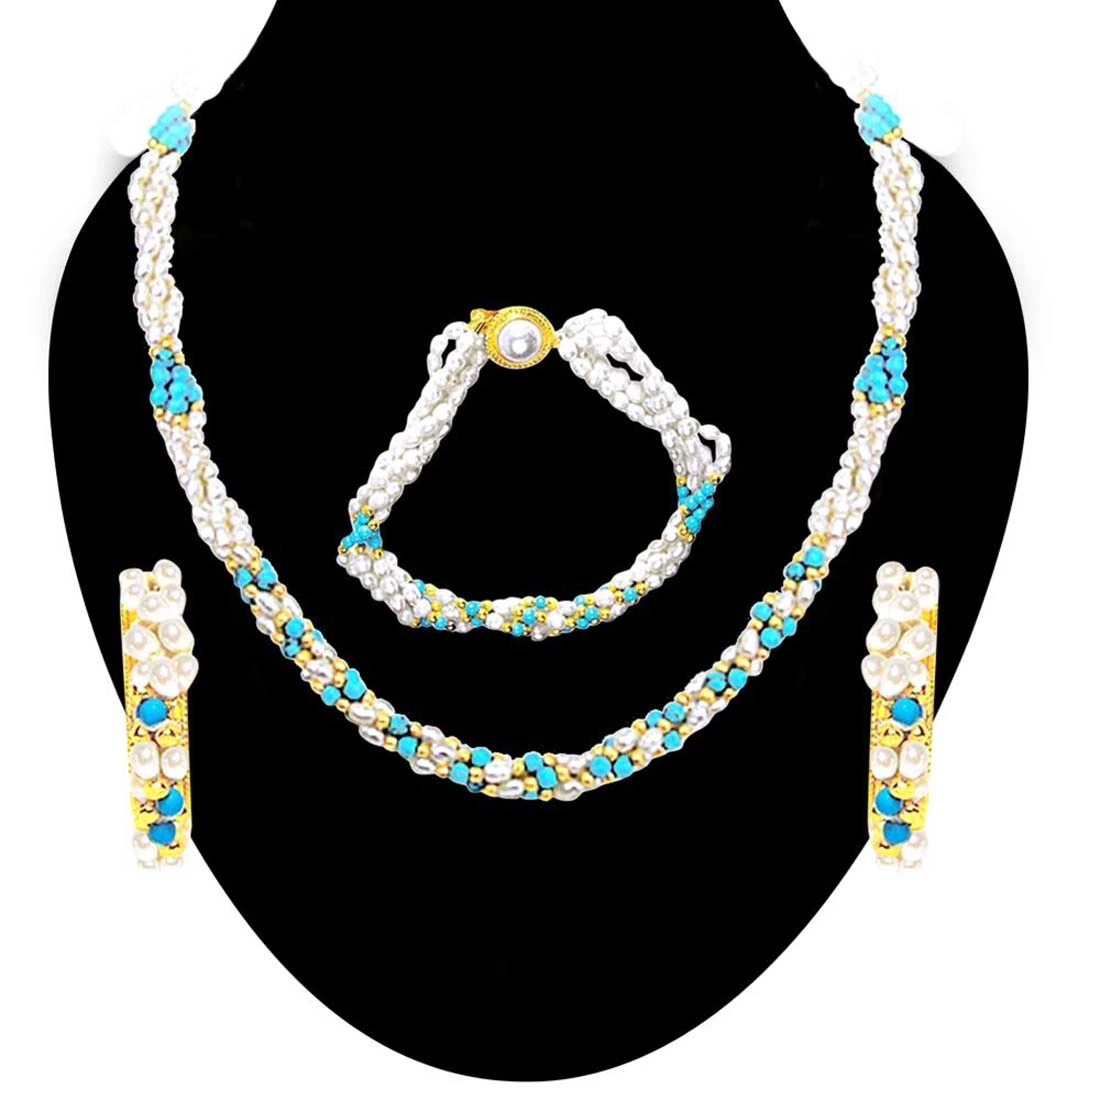 Splendid Perfection - 3 Line Twisted Real Rice Pearl & Turquoise Beads Necklace, Earring & Bracelet Set for Women (SP99)